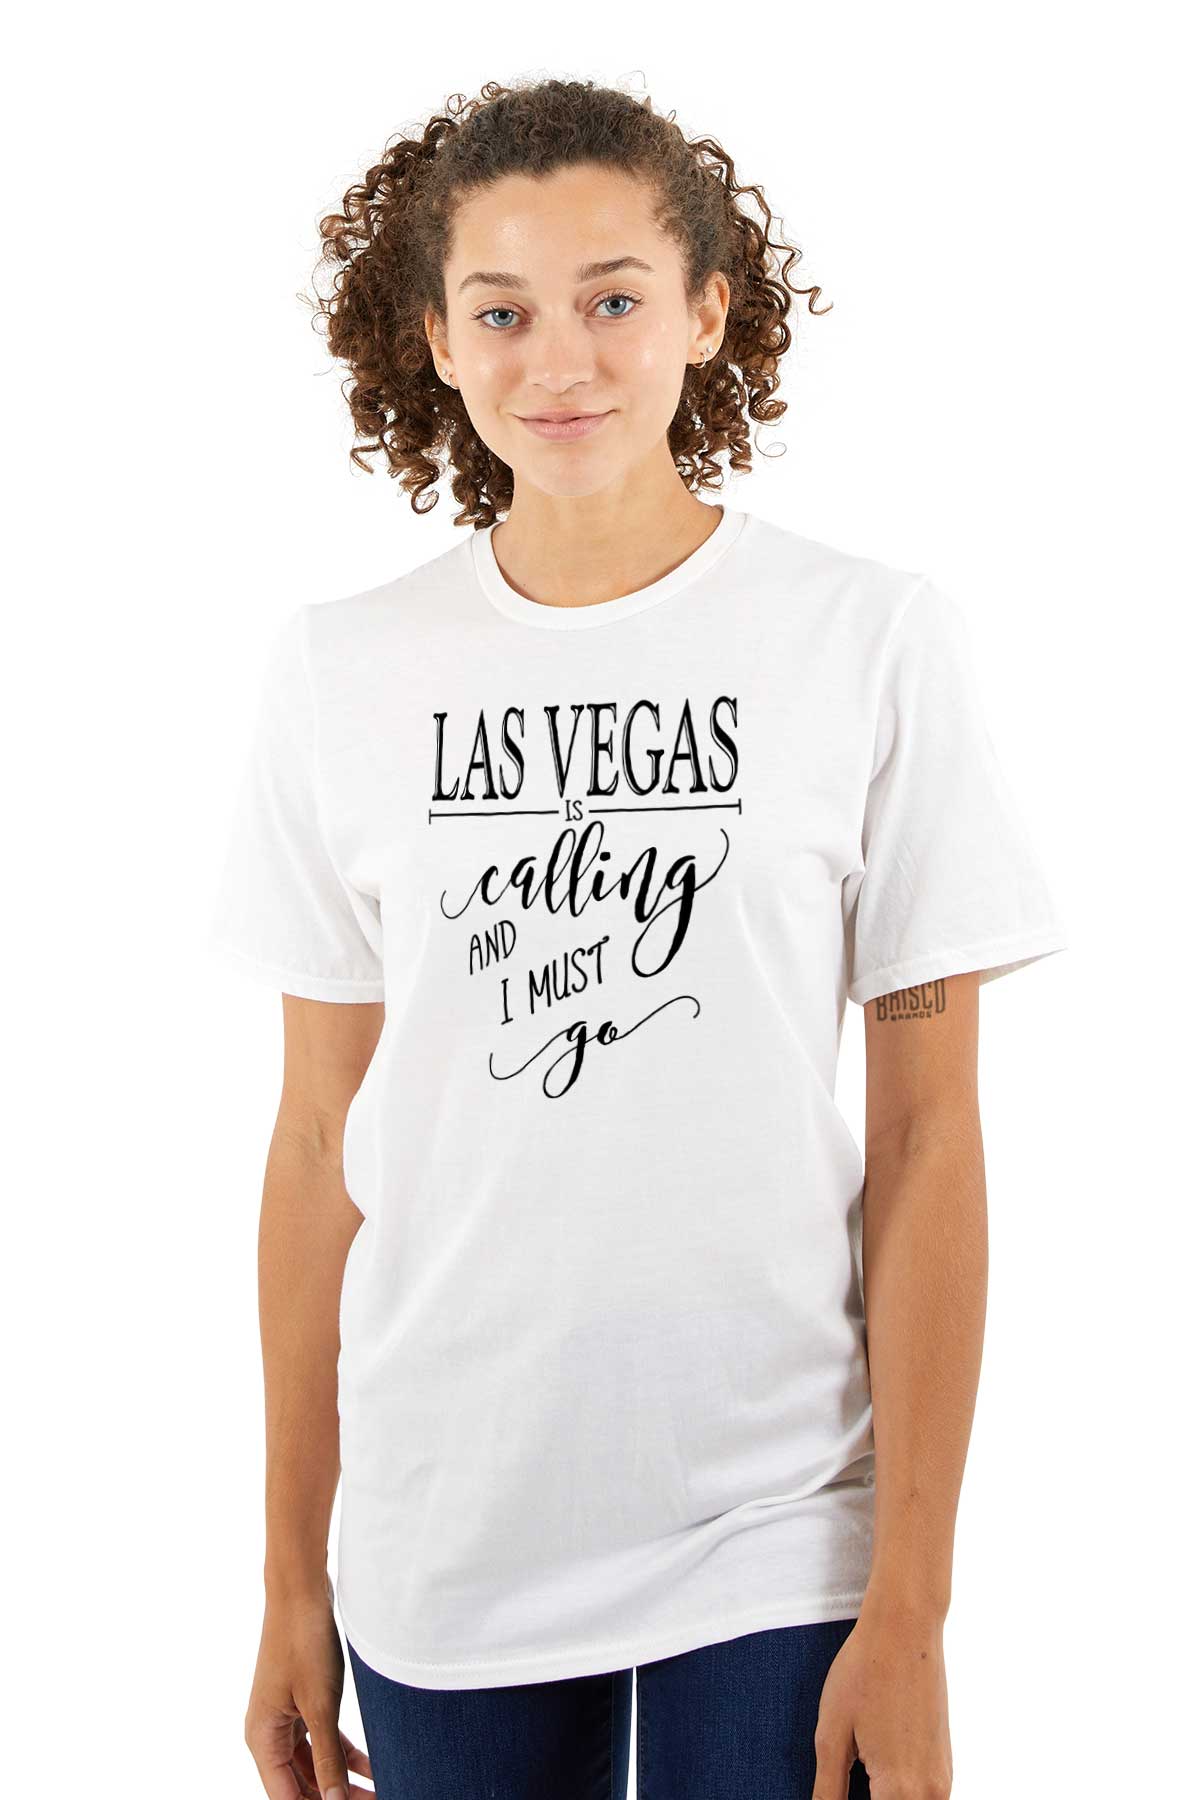 Las Vegas is Calling I Must Go Women's Graphic T Shirt Tees Brisco Brands 3X - image 1 of 5